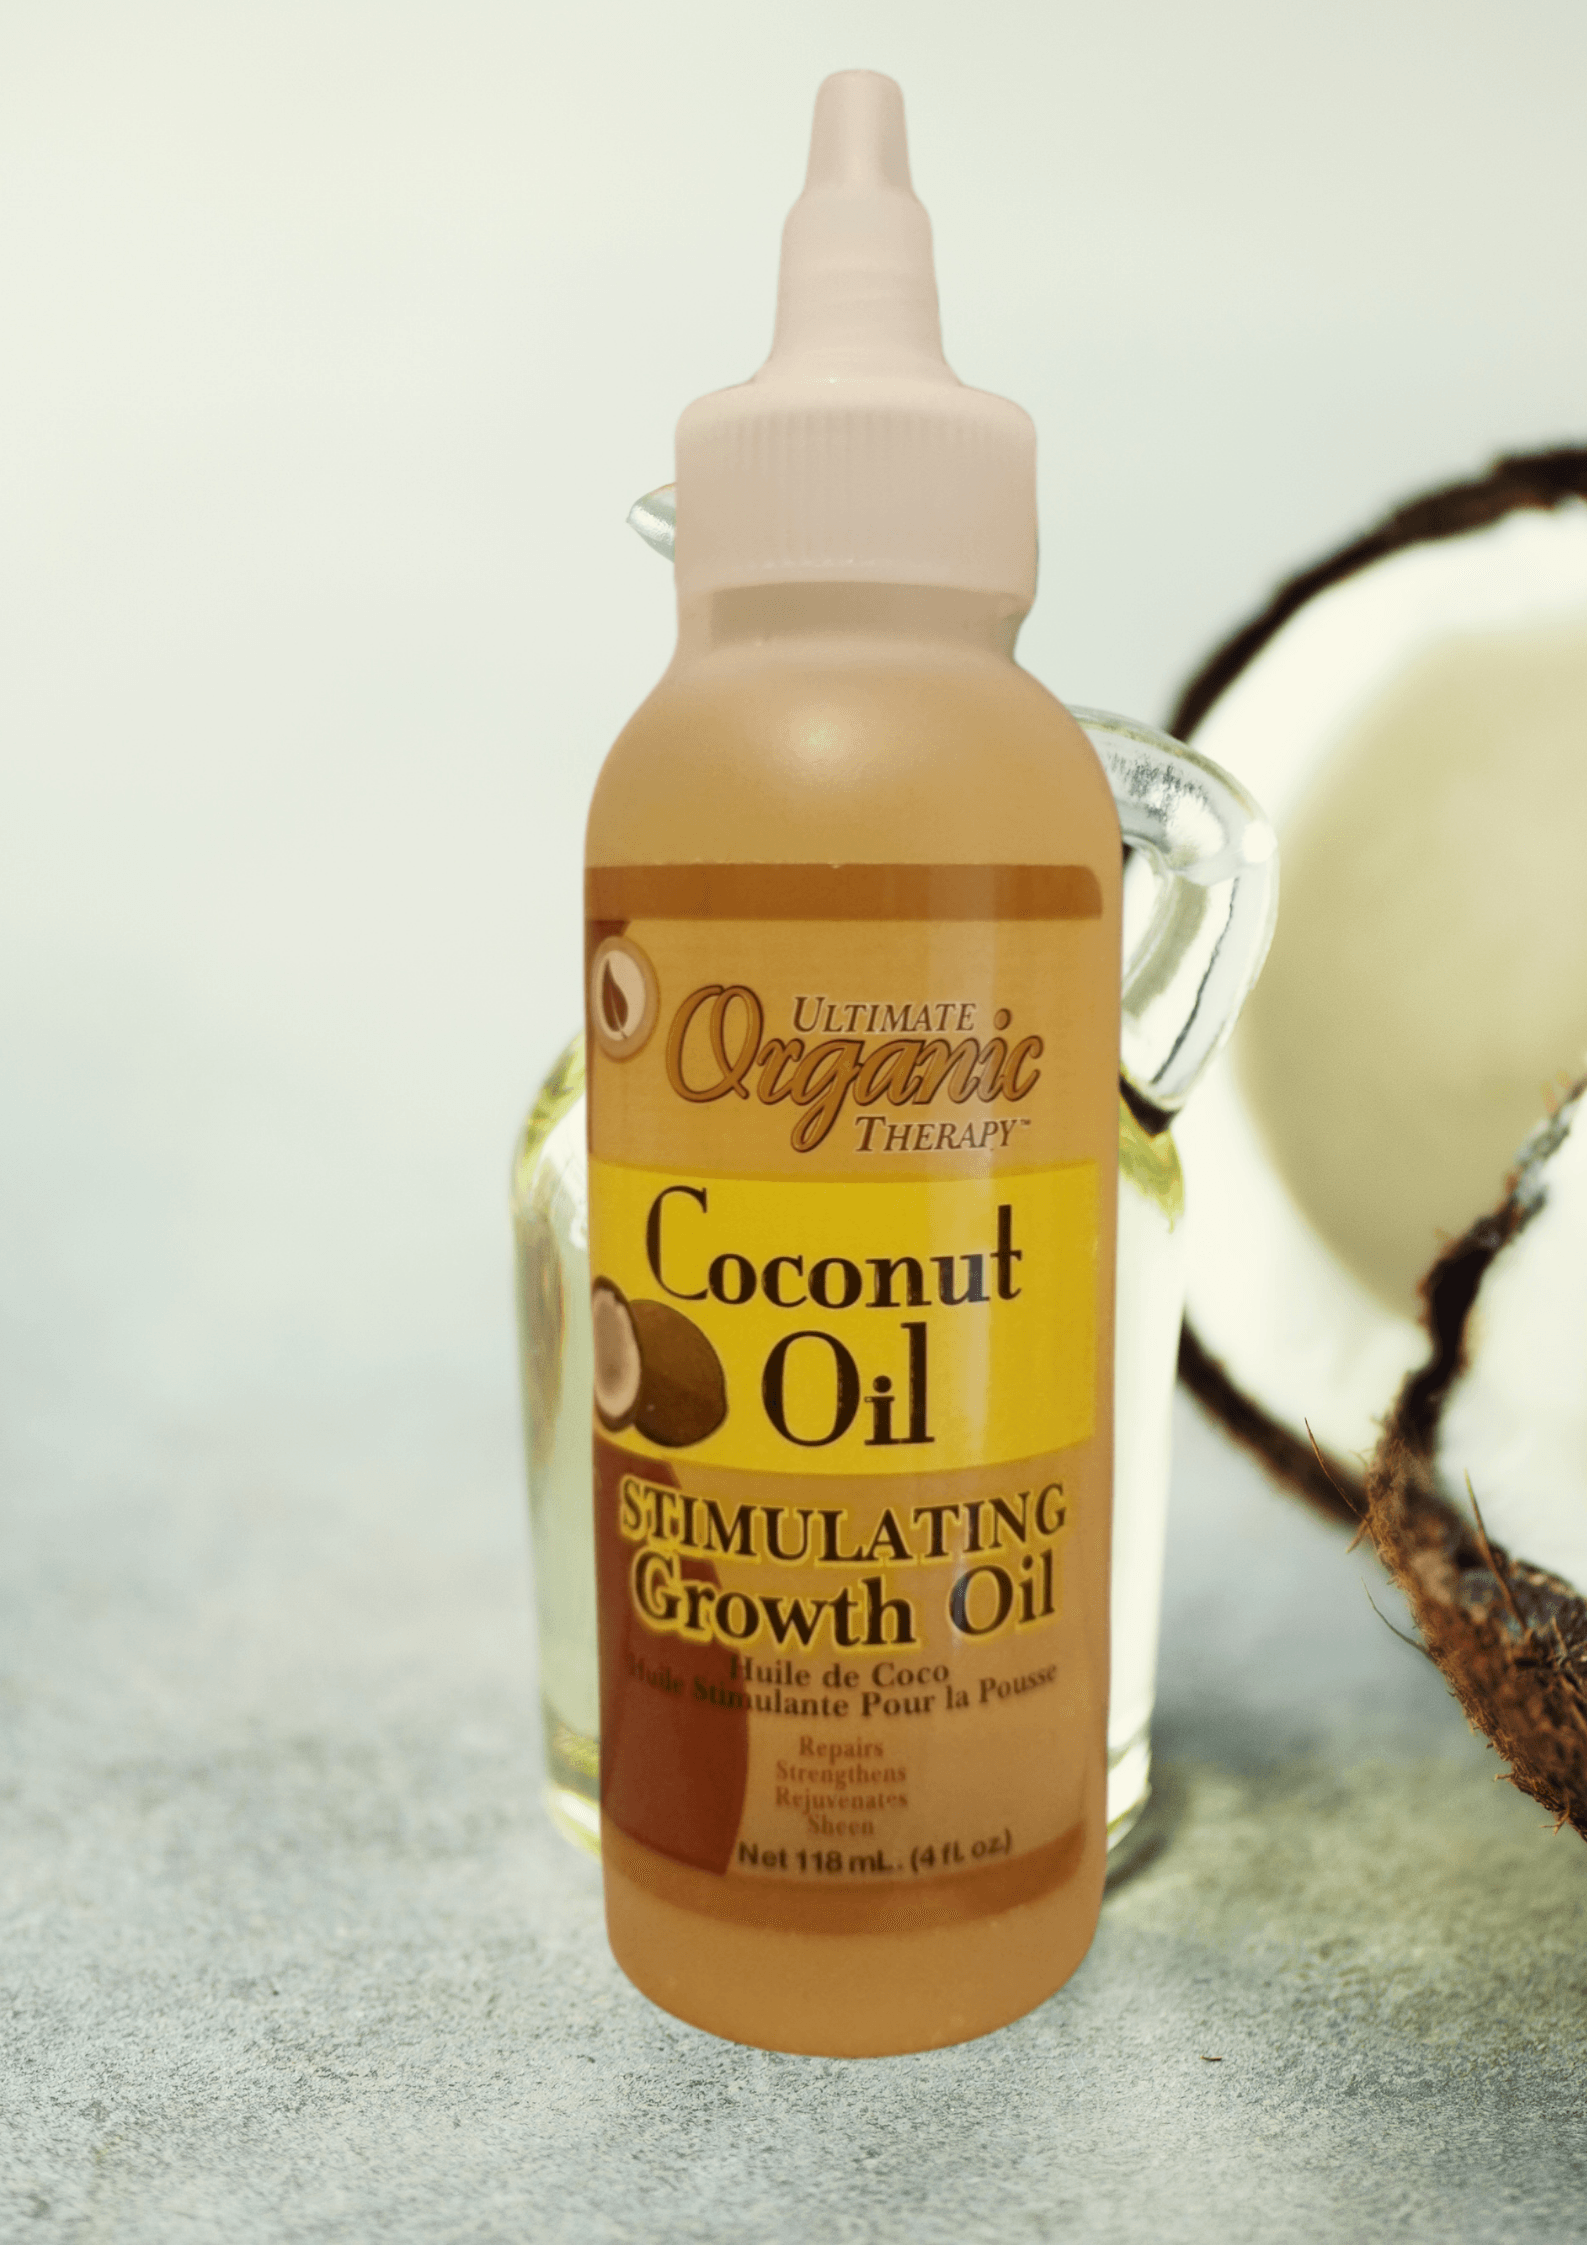 Ultimate Organic Therapy Coconut Stimulating Growth Oil 118 ml - LocsNco